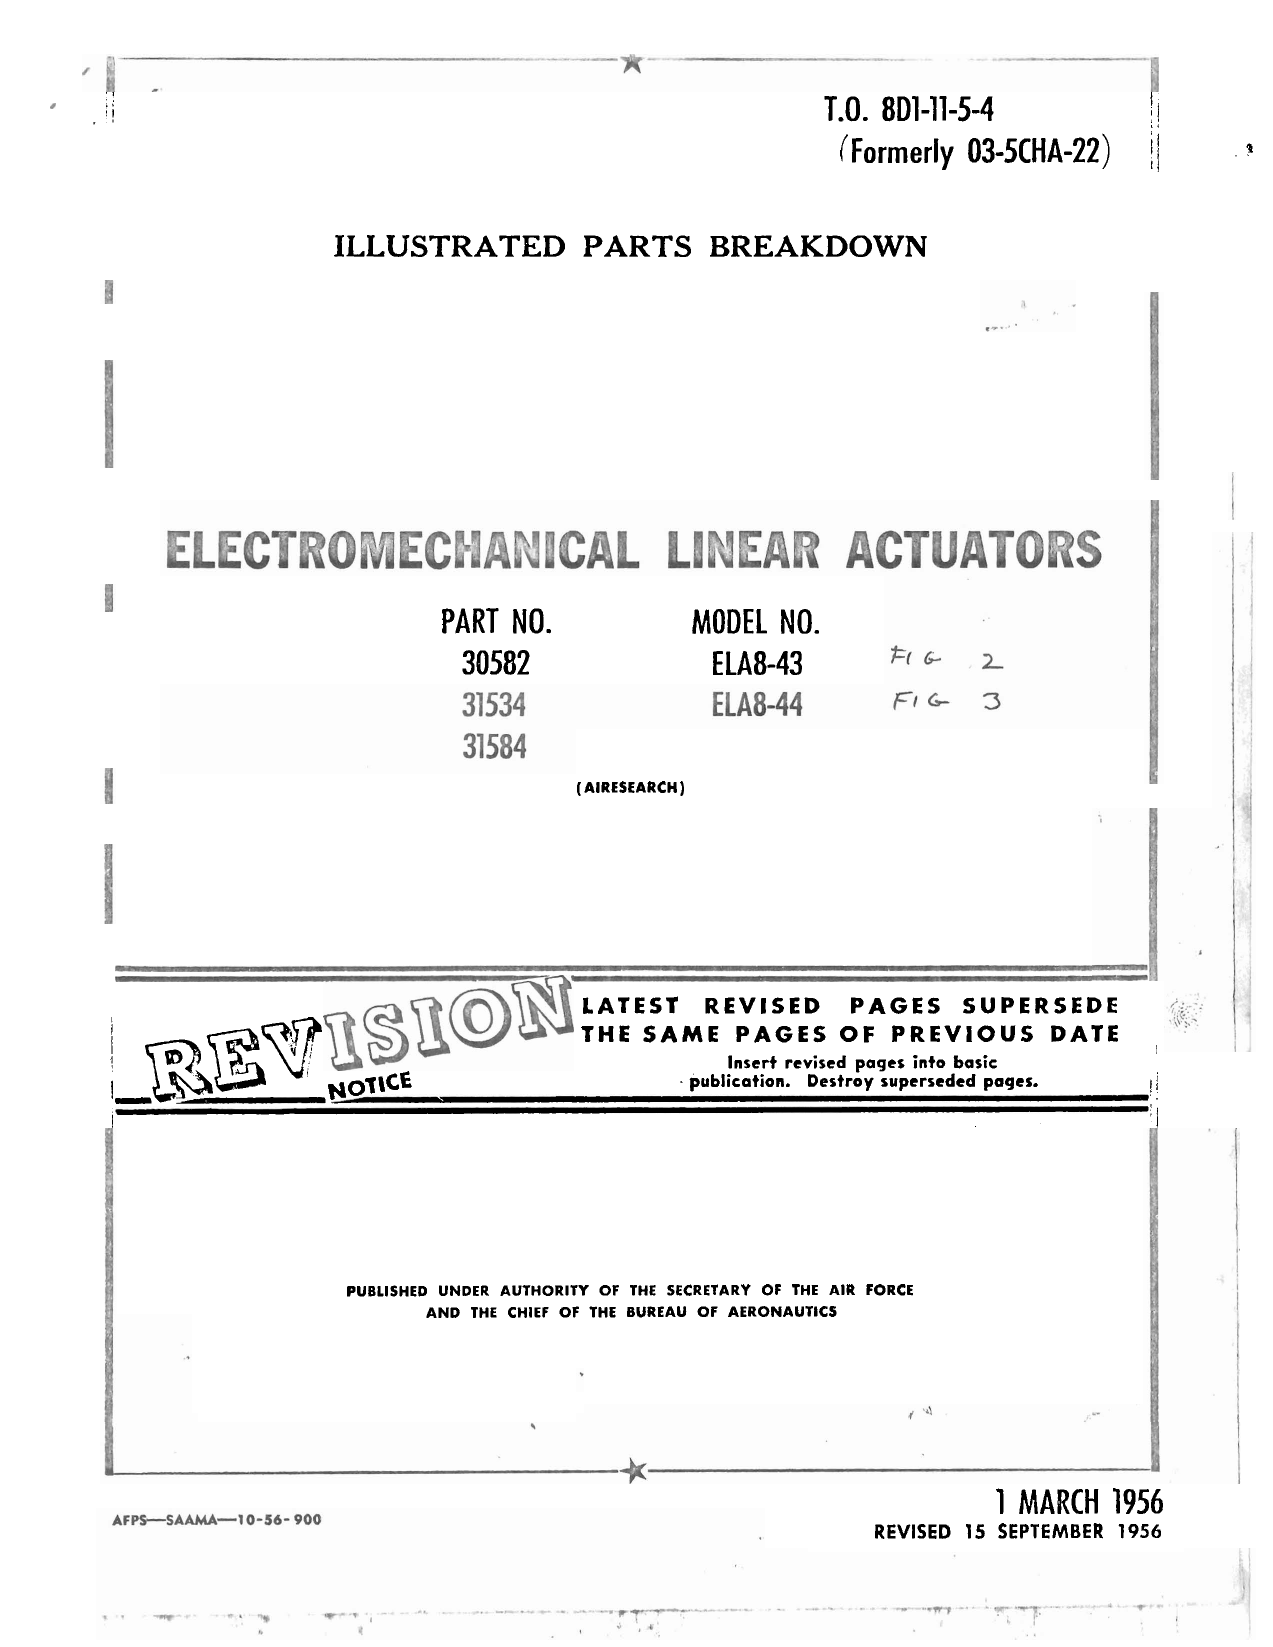 Sample page 1 from AirCorps Library document: Illustrated Parts Breakdown for Electromechanical Linear Actuators - Parts 30582, 31534, 31584 - Model ELA8-43 and ELA8-44